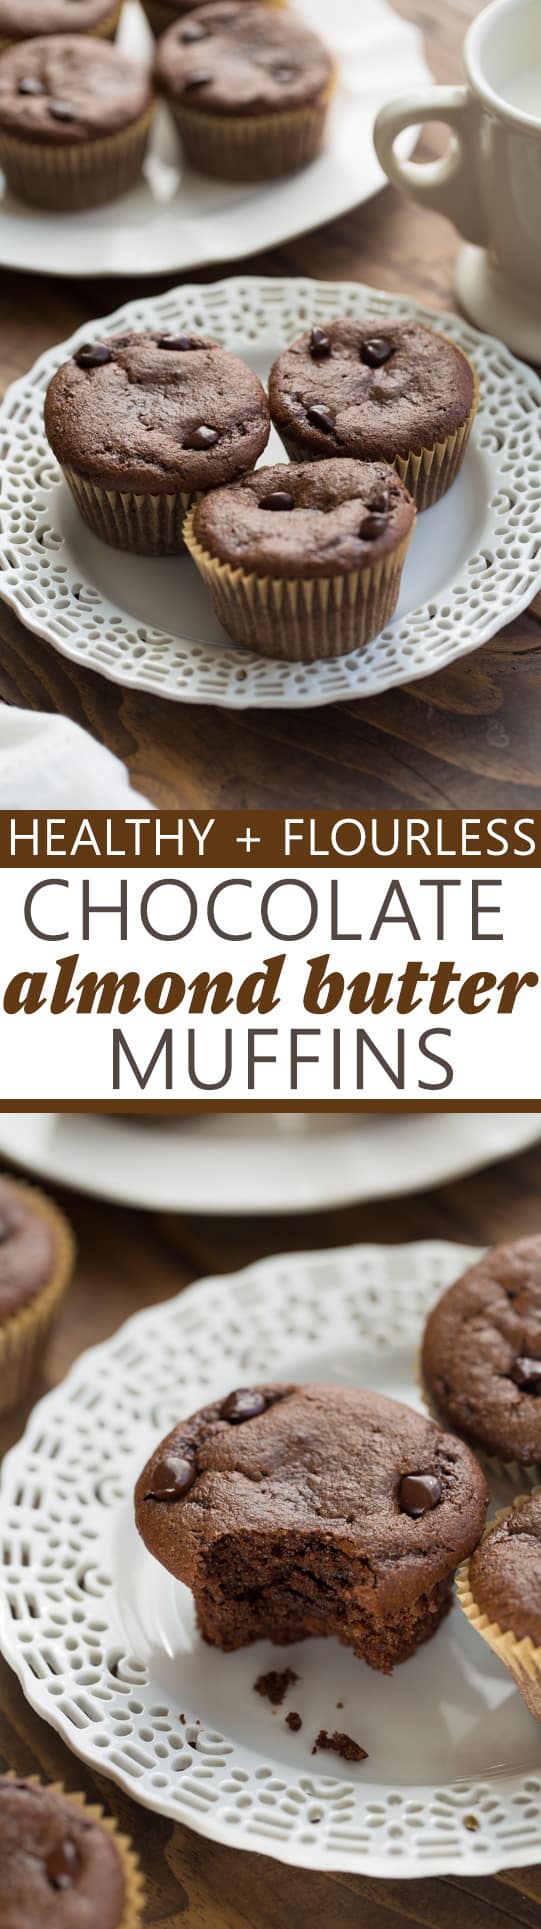 Healthy Chocolate Almond Butter Muffins! Flourless, gluten-free, refined-sugar-free and so easy to make! 